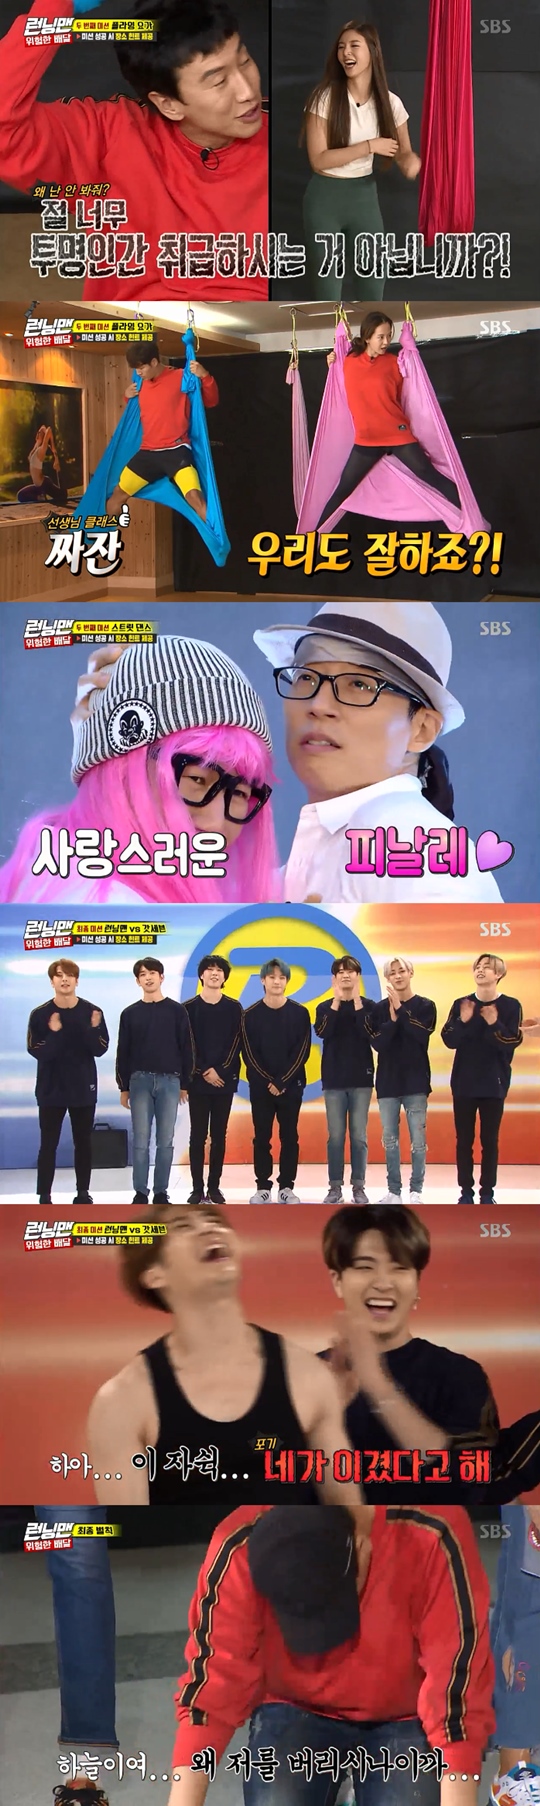 On the 16th broadcast SBS Running Man, he performed a bag delivery mission; the identity of the bag was still kept secret.Ive been playing Flying Yoga on air and it was difficult, Song Ji-hyo said, with Kim Jong-kook hesitant, saying the stretch was weak.Yang Se-chan said, My brother chose because of my teacher without thinking. Lee Kwang-soo did not deny it.Kim Jong-kook was worried that Park Na-rae would come as a teacher.The daily Flying Yoga teacher was Yoo Seung-ok. The Flying Yoga team challenged the butterfly posture. Kim Jong-kook and Song Ji-hyo often followed suit.Monkey learned quickly, and Kim Jong-kook was content with the fun of flying yoga, and he GOT7 a hint by succeeding in the final chandelier, which was a difficult one.The street dance teachers included Jay Black and the Maries, who had learned to dance and performed before they could get a hint of place without a single movement being wrong.The mission song was Bruno Mars Treasure: Yoo Jae-Suk, Ji Seok-jin, Jeon So-min and Haha worried about the how do you do this?Haha laughed, saying, Im more worried about the look of Yoo Jae-Suk than the movement.He began to learn to dance. Jay Black praised the beats. He told me about the simplified choreography for the Running Man members.I failed repeatedly, such as being wrong in a place where I did not make a mistake, but I was able to get a hint by succeeding.For the final gate, the group GOT7 appeared; Yoo Jae-Suk was worried about a confrontation with the victorious GOT7; Jeon So-min said: Seven male guests are first seen.I dont know where to put my eyes, shyly said Jeon So-min, who was overly sullen, grabbed his first game thumb and scored 8cm in the long jump.Yoo-gum tried to roll ahead without jumping, teasing it as a dirty play and a resemblance to Lee Kwang-soo.Running Man Ace Kim Jong-kook hit 32cm; GOT7s Ace Jackson jumped 57cm.Jacksons performance gave GOT7 the first game; however, the second and third Game were won by Running Man.The Running Man team made the final destination delivery. Only one person was penalized. Everyone was wondering about the bag.The final penalty was Yang Se-chan, who was hit by three times as strong Water cannon.